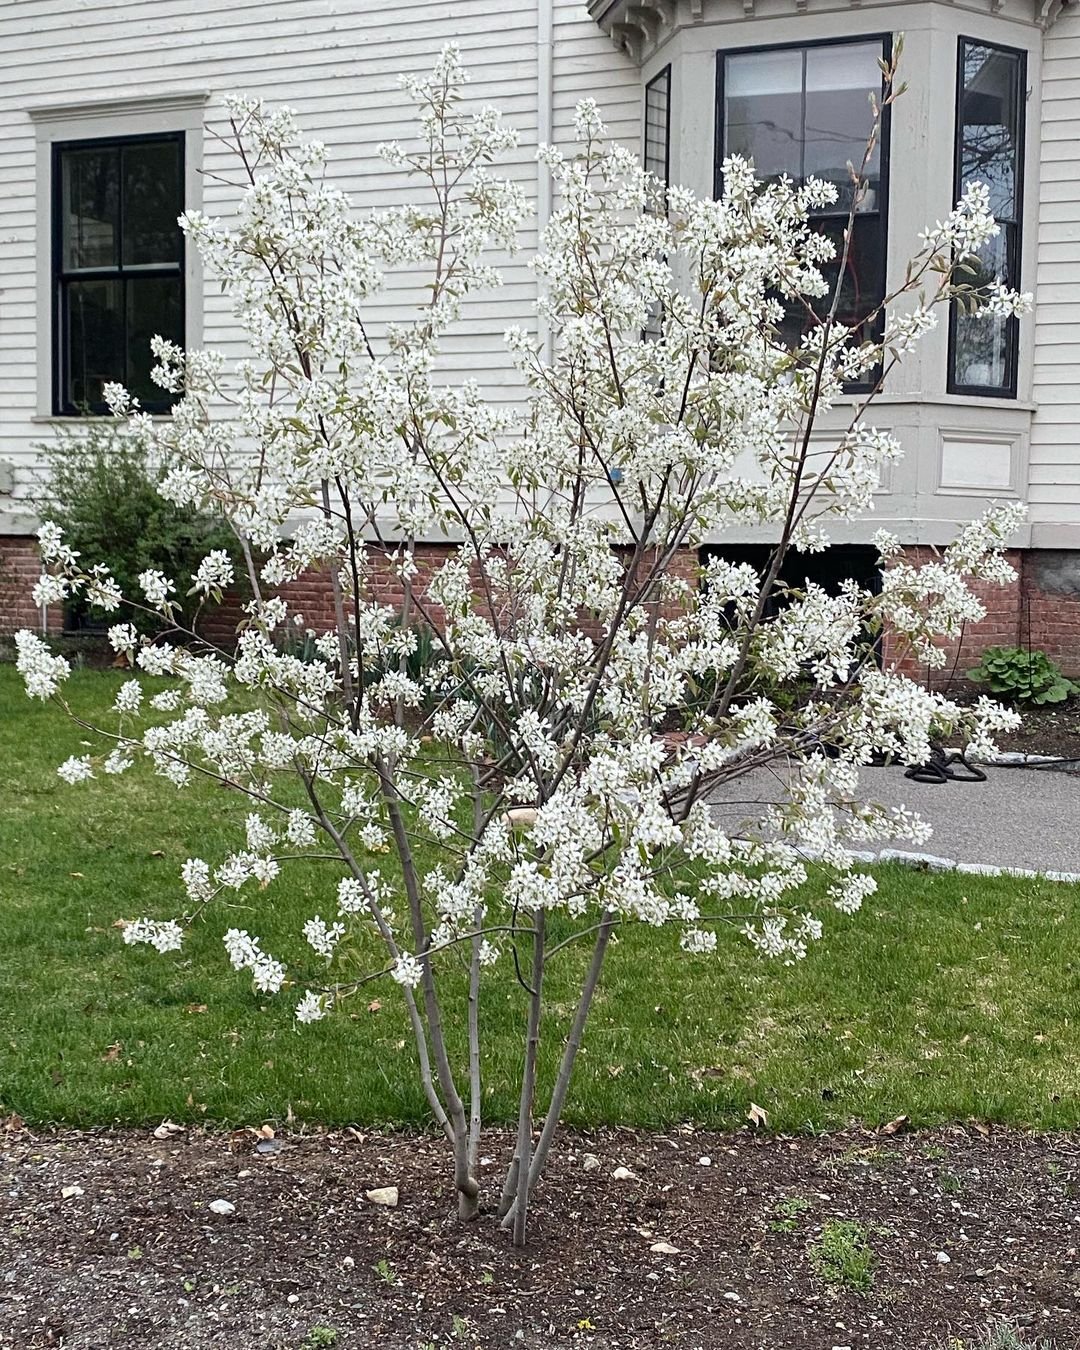 Serviceberry tree with white blossoms in spring, green leaves in summer, red berries in fall, and bare branches in winter.